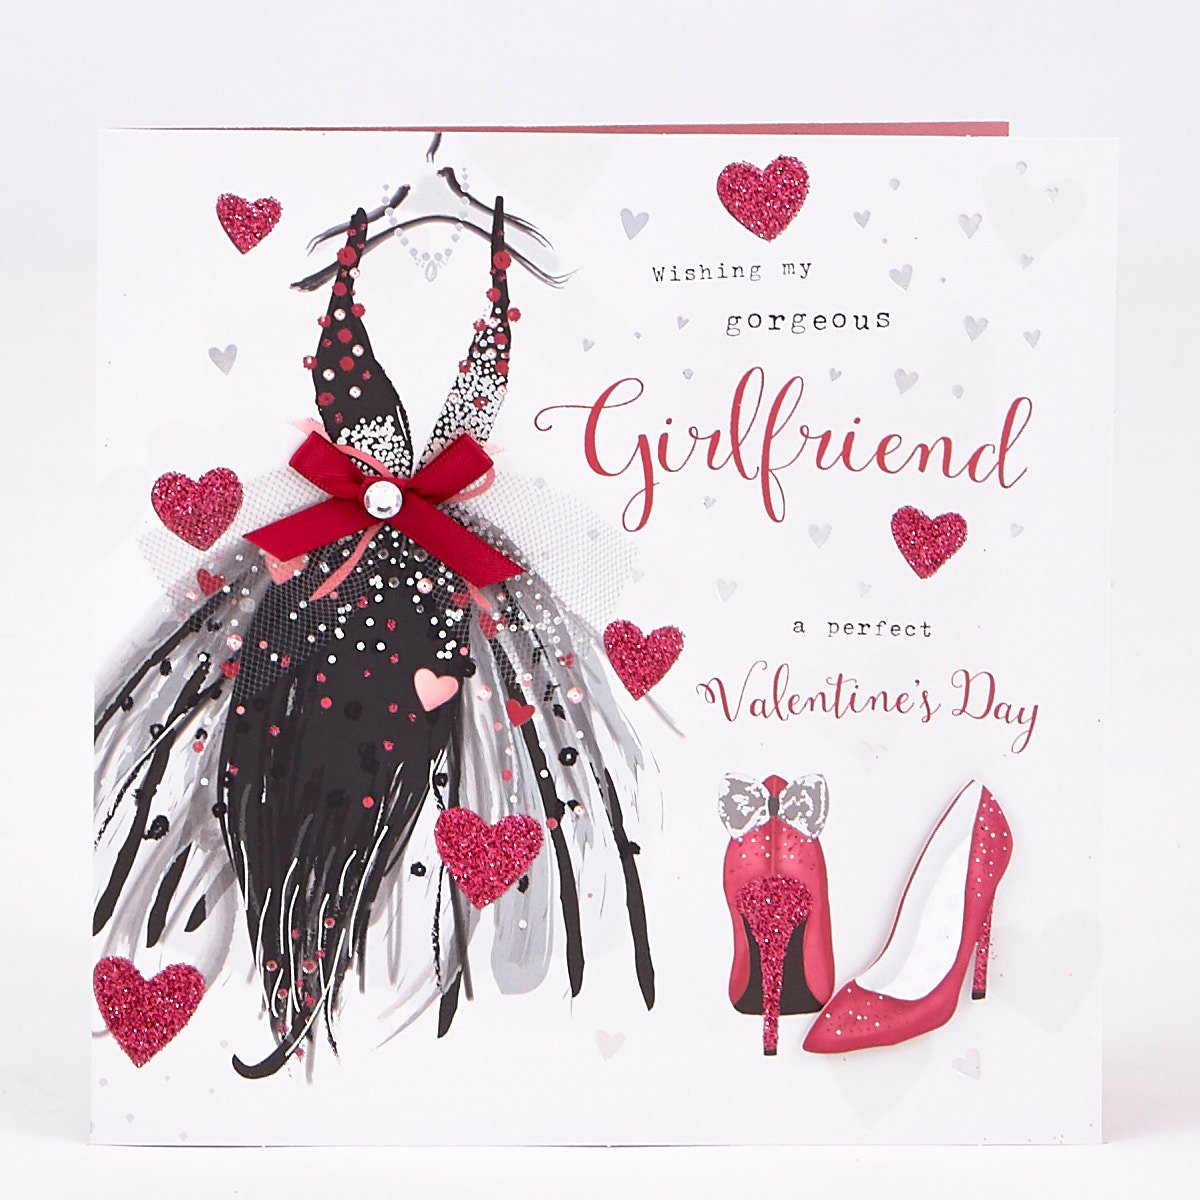 Valentine's Day Card - Boutique Girlfriend Shoes & Dress